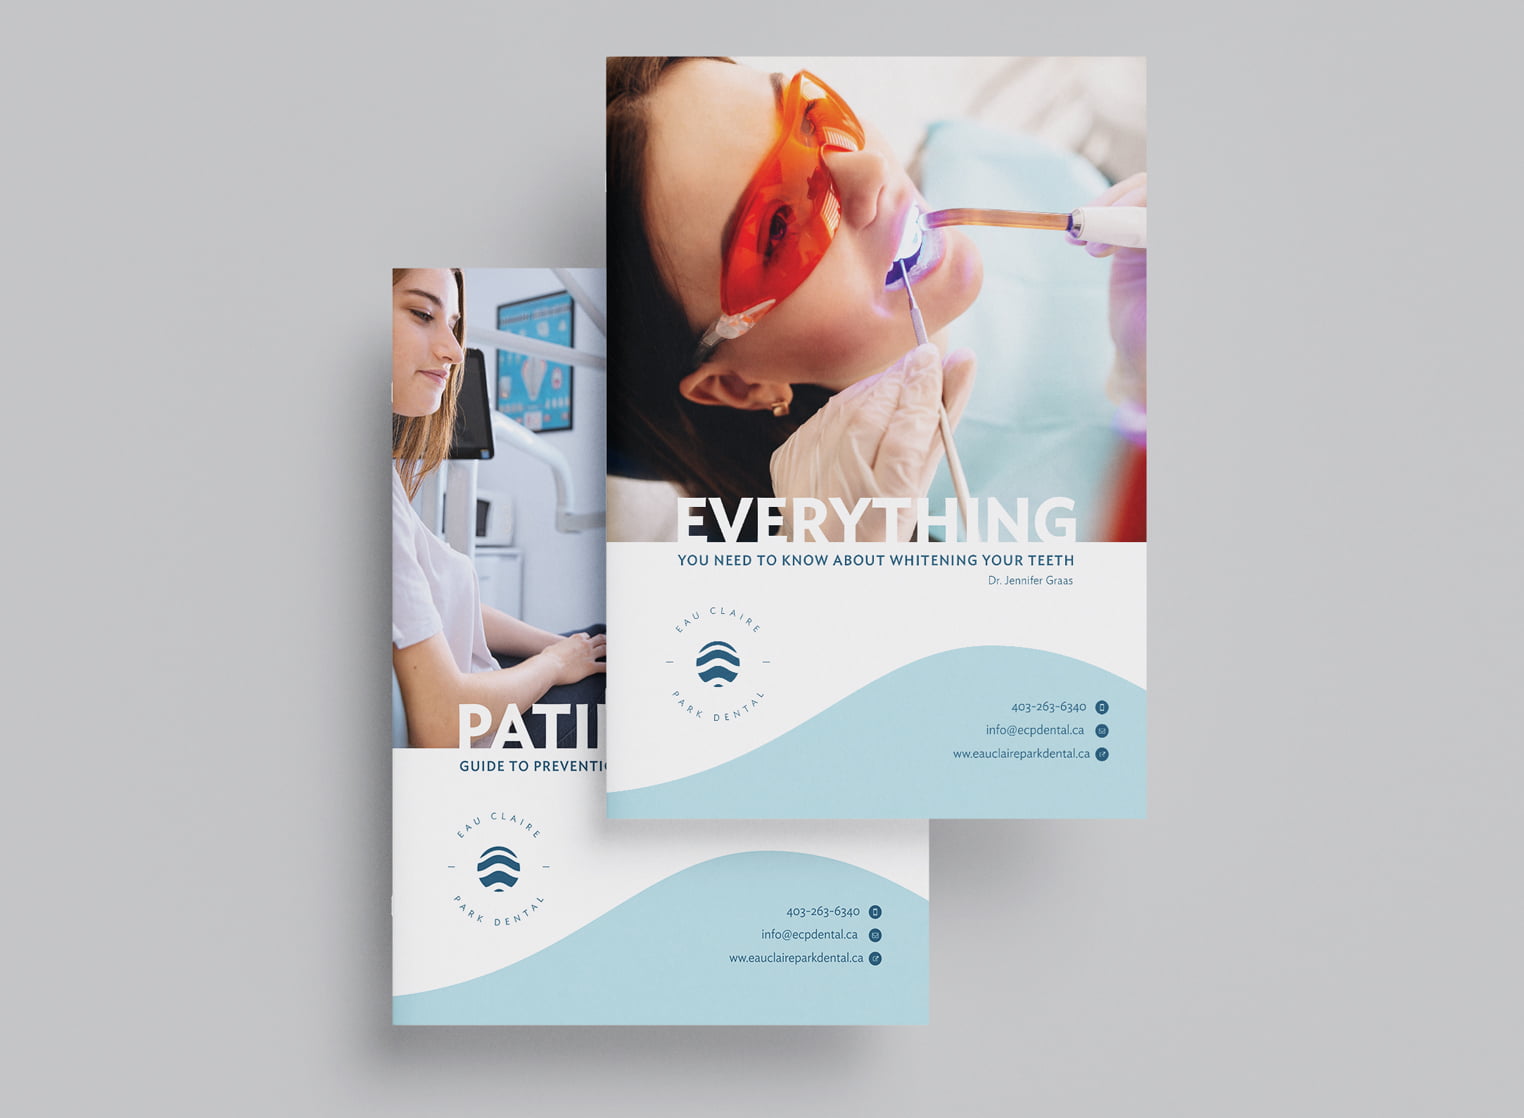 Eau Claire Park Dental Stationary | Creative Elements Consulting